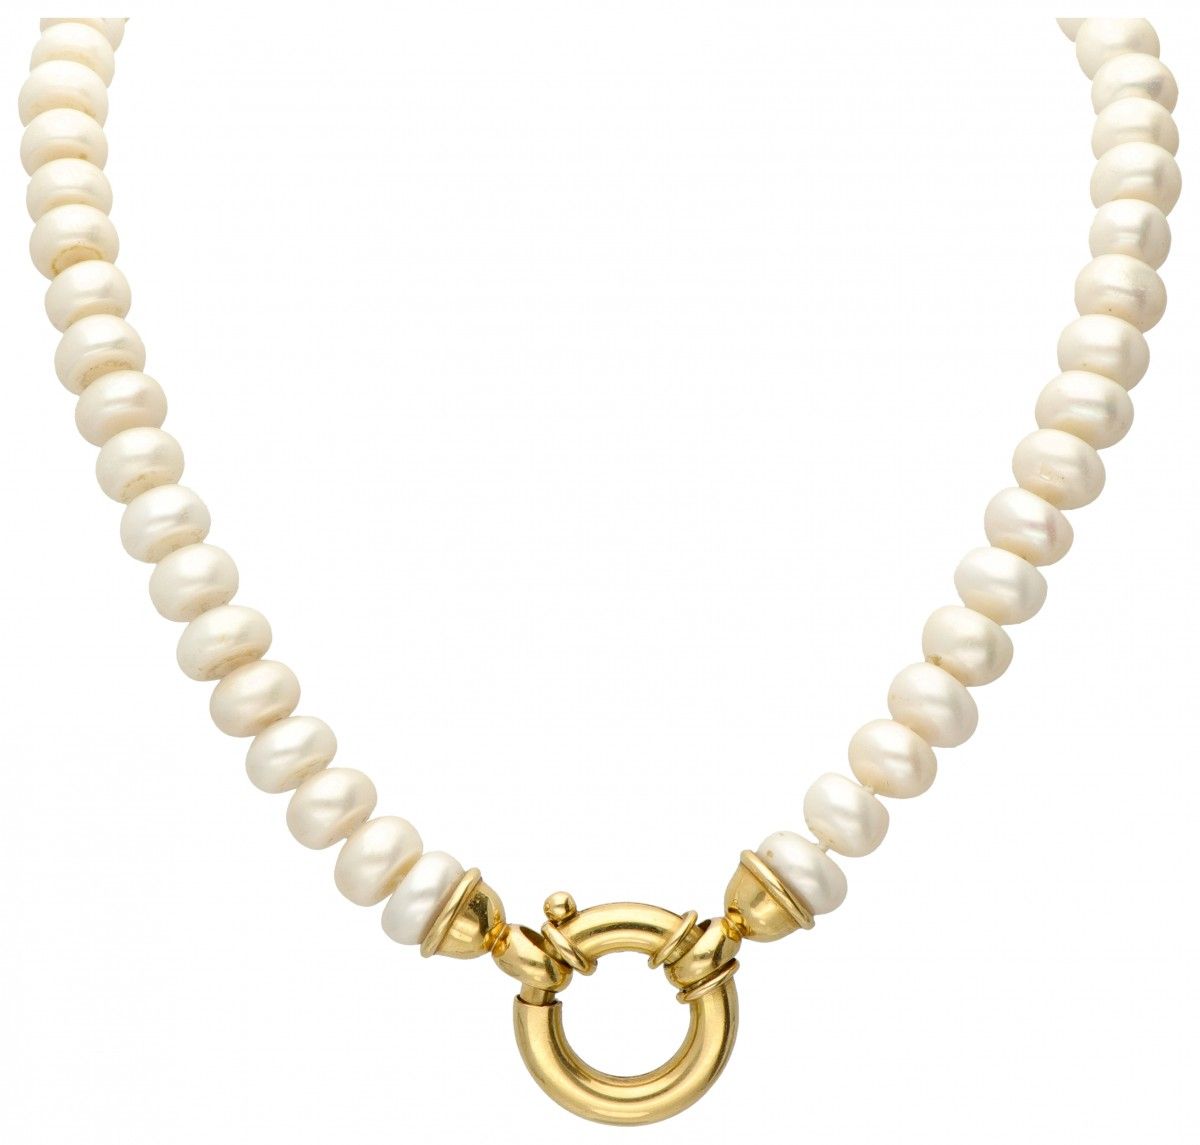 Vintage freshwater pearl necklace with an 18K. Yellow gold closure. 印章：750。Ø 培养的&hellip;